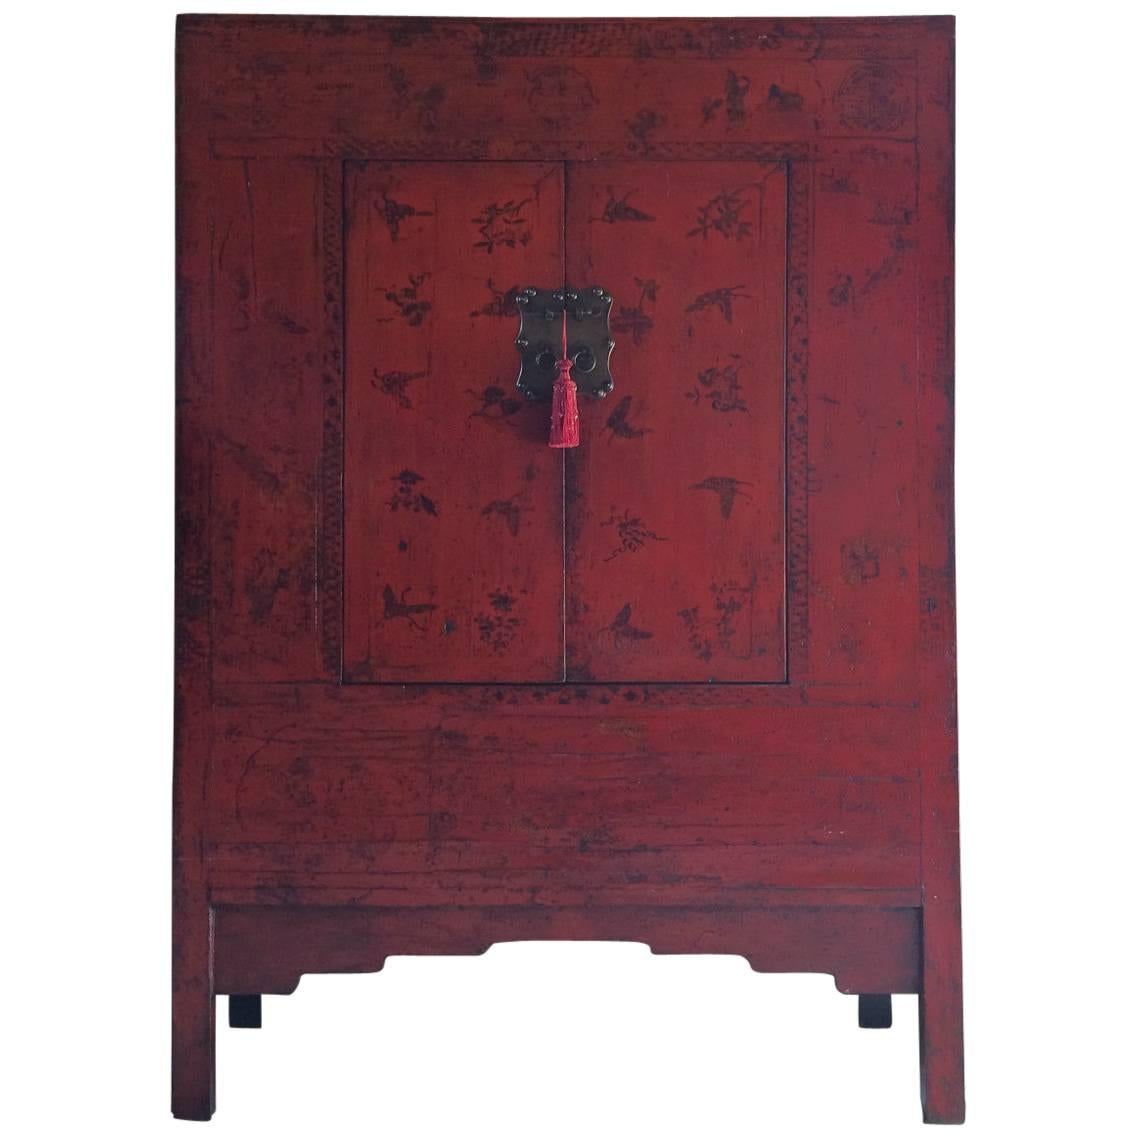 Antique Chinoiserie Wardrobe Armoire Lacquered Oriental Chinese Shanxi